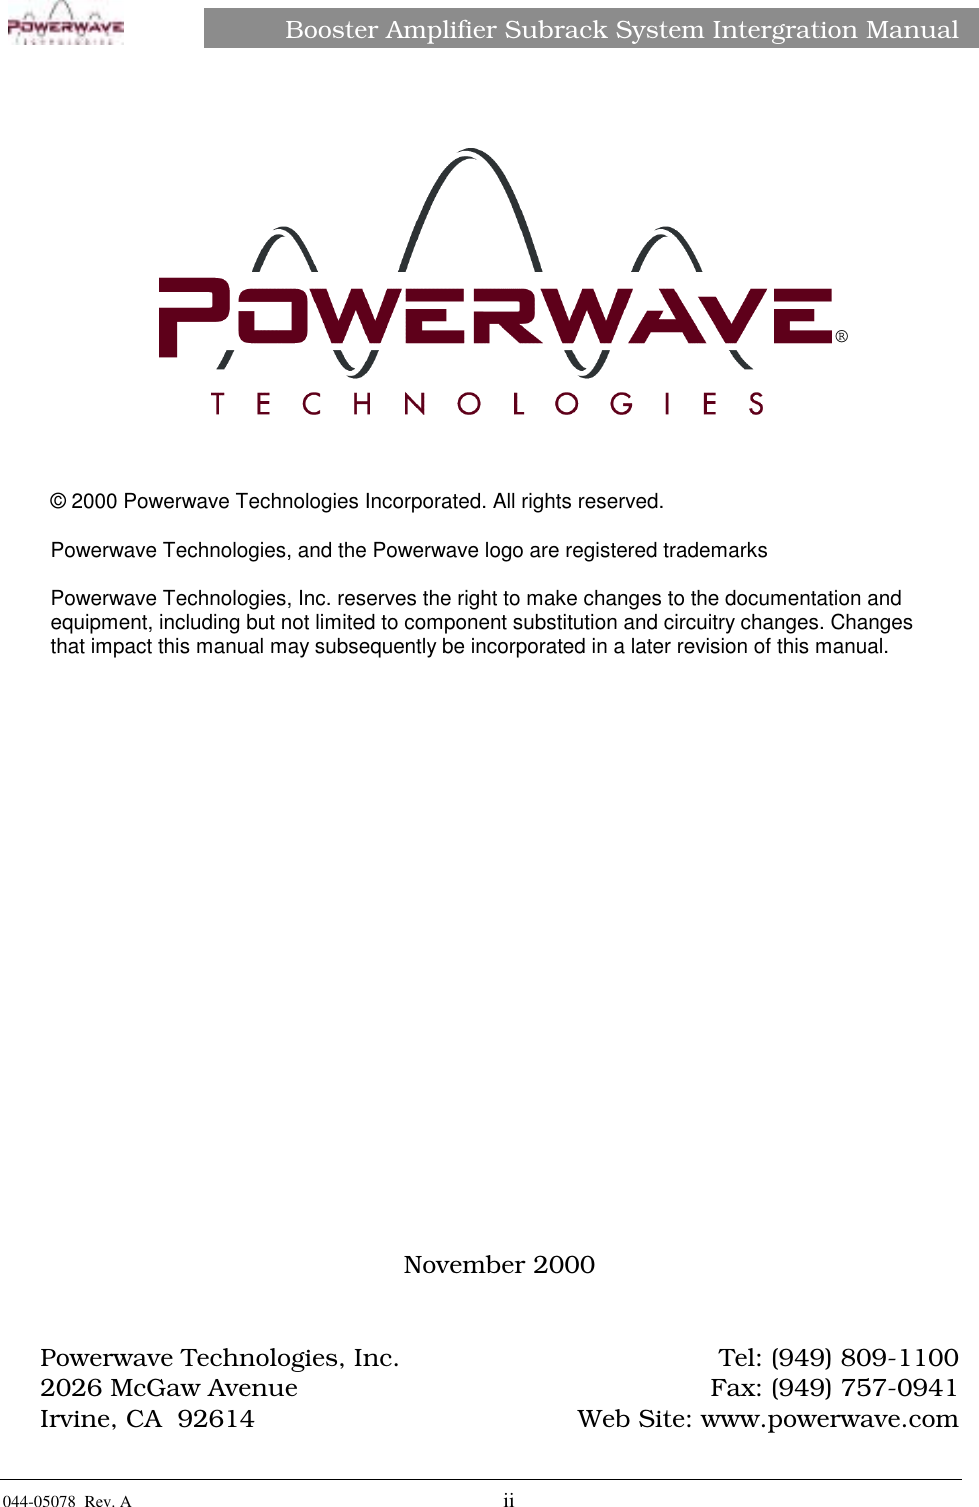 Booster Amplifier Subrack System Intergration Manual044-05078  Rev. A iiNovember 2000Powerwave Technologies, Inc. Tel: (949) 809-11002026 McGaw Avenue Fax: (949) 757-0941Irvine, CA  92614 Web Site: www.powerwave.com© 2000 Powerwave Technologies Incorporated. All rights reserved.Powerwave Technologies, and the Powerwave logo are registered trademarksPowerwave Technologies, Inc. reserves the right to make changes to the documentation andequipment, including but not limited to component substitution and circuitry changes. Changesthat impact this manual may subsequently be incorporated in a later revision of this manual.®